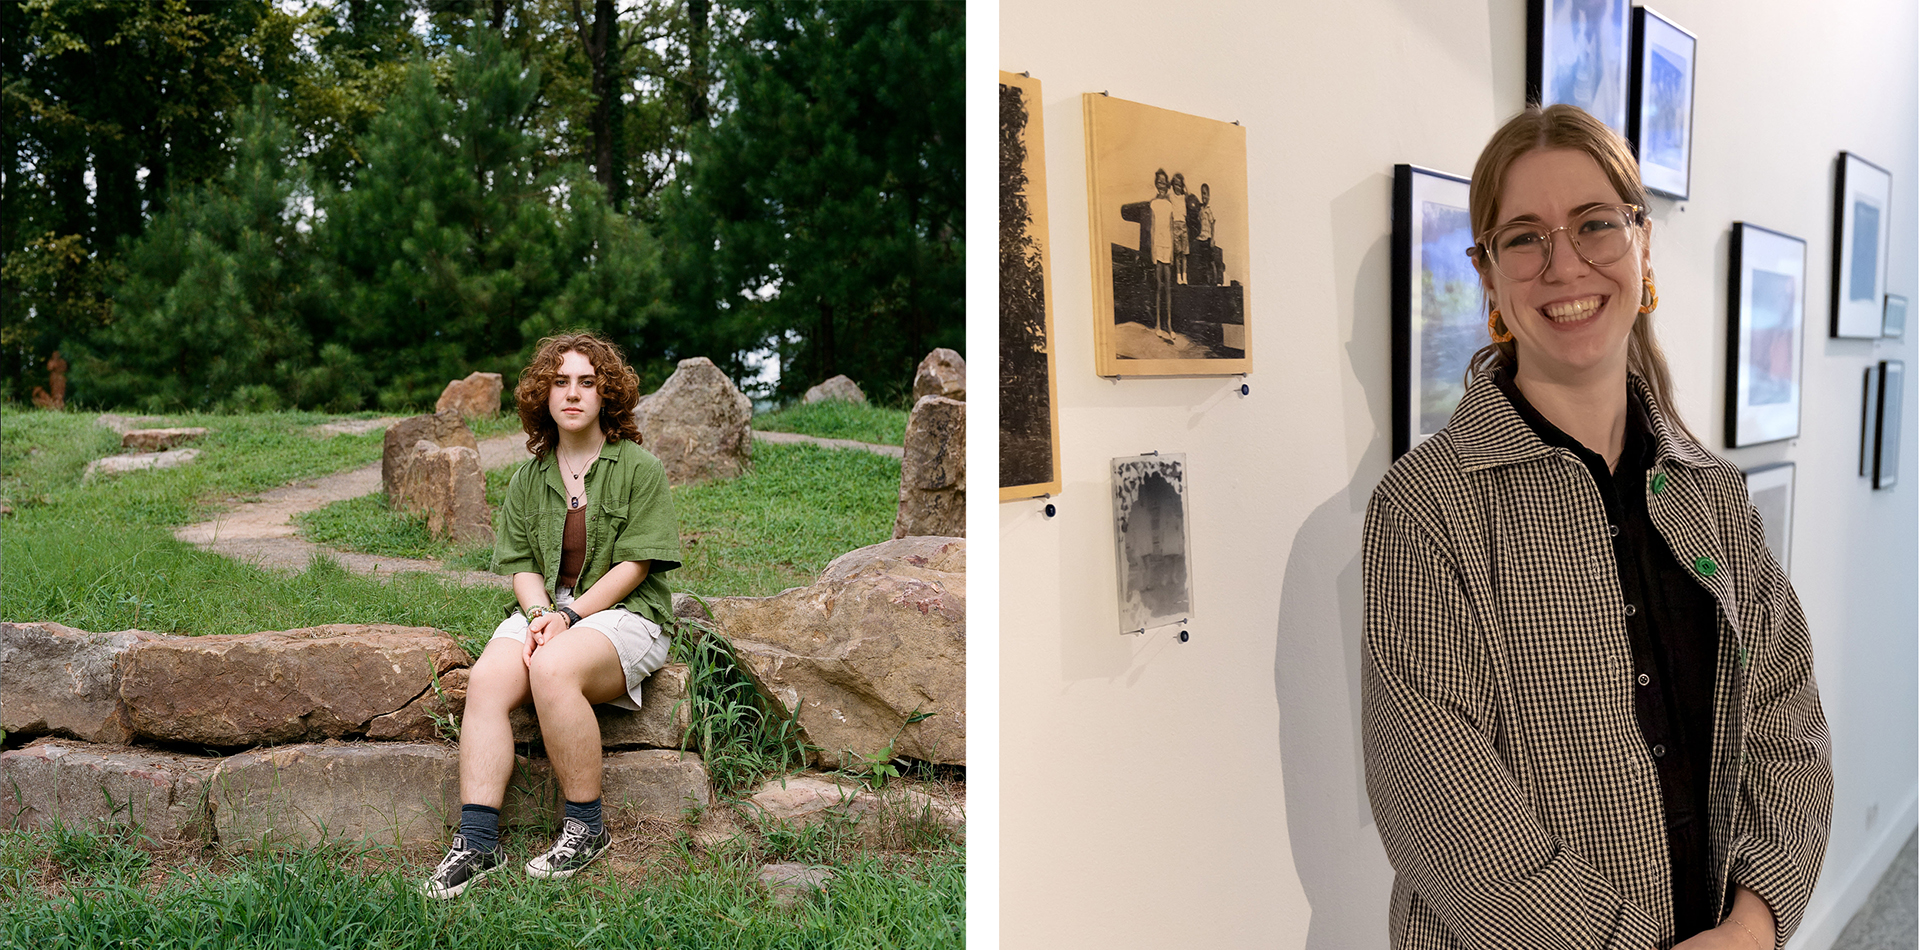 Left: figure in a landscape and with: woman standing in front of wall with pictures